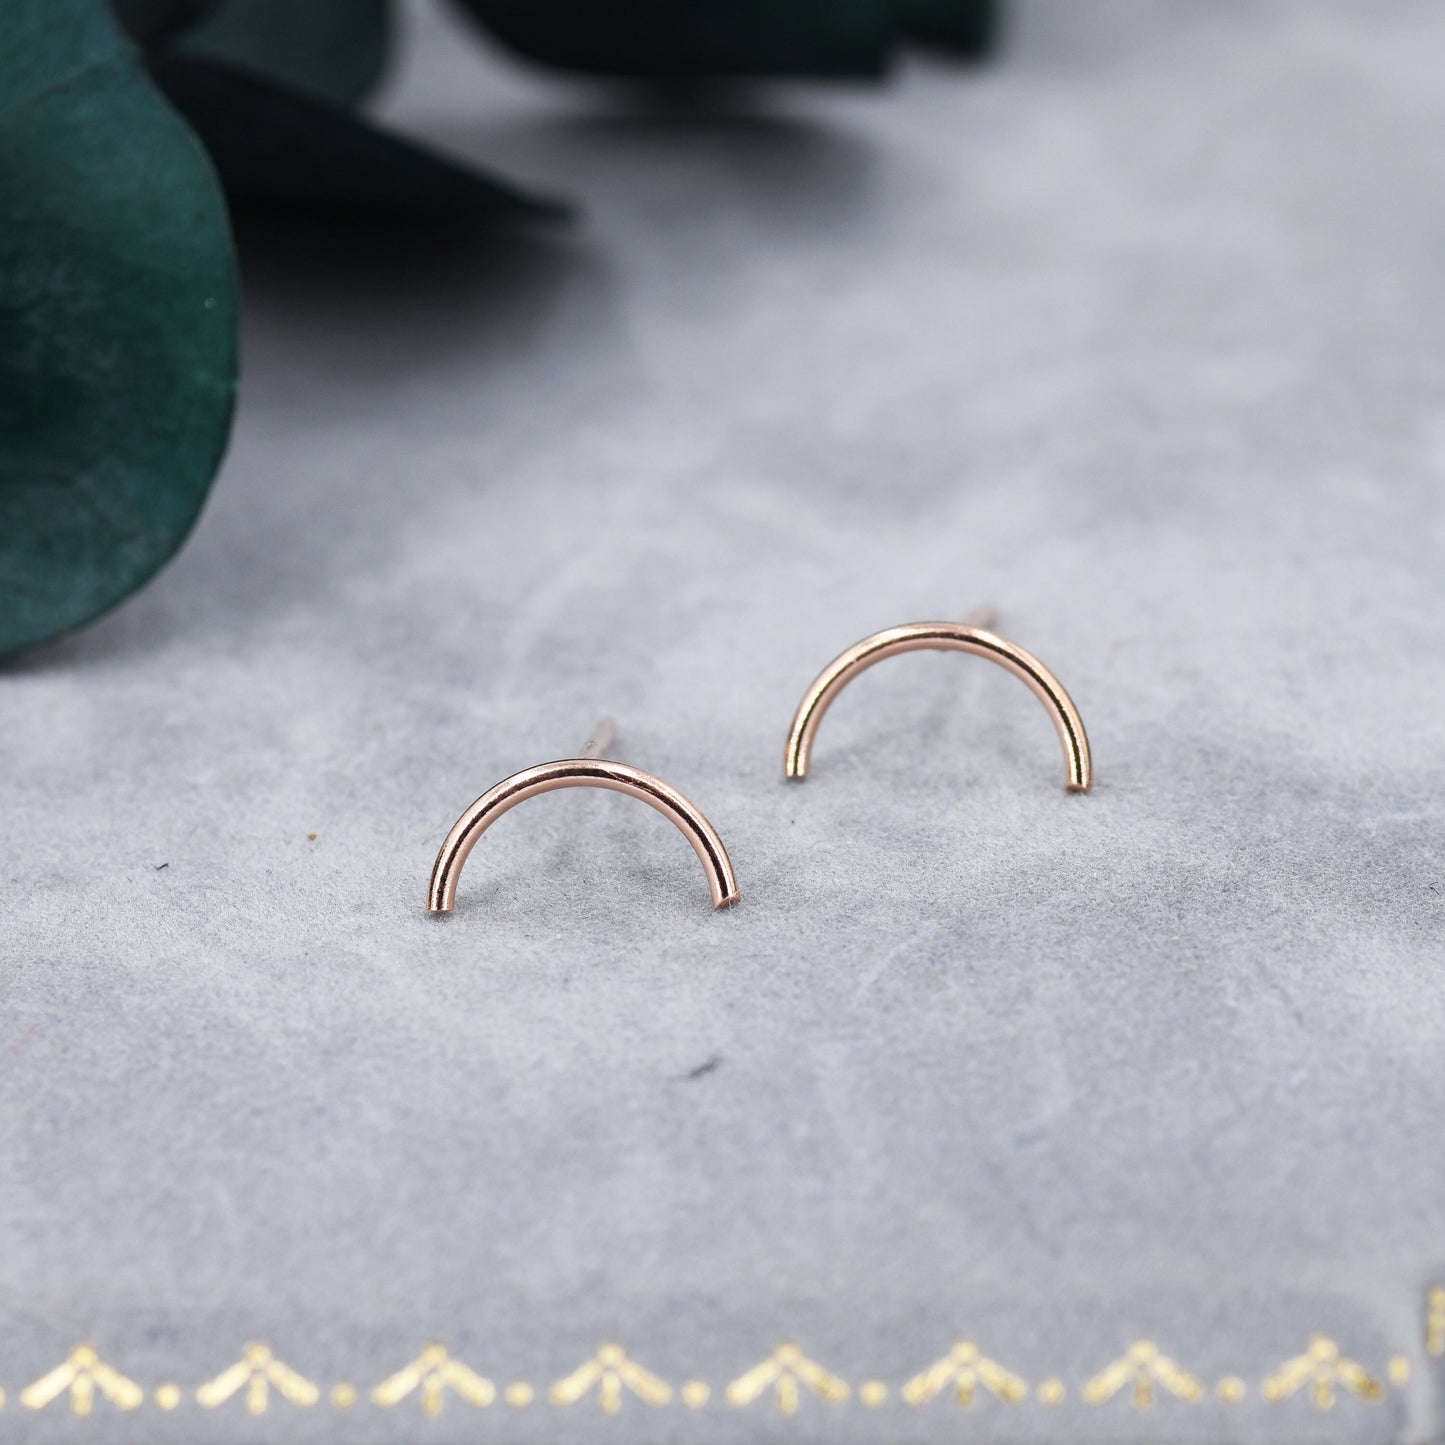 Delicate Curved Bar Stud Earrings in Sterling Silver, Gold or Silver, Simple and Minimalist, Geometric, Discreet